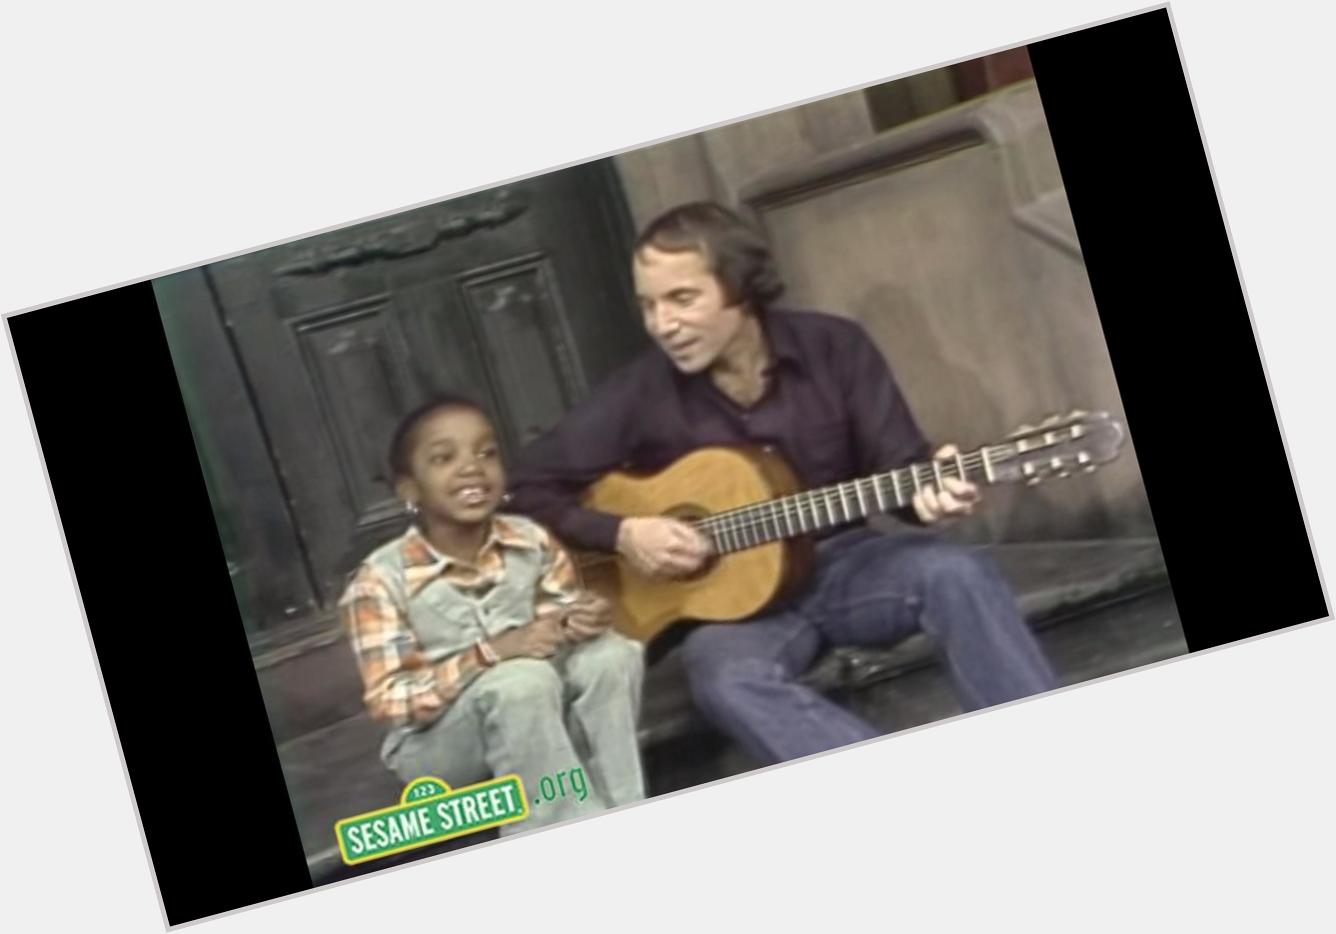 A little girl steals spotlight from birthday boy Paul Simon during 1977 visit to Sesame St.  